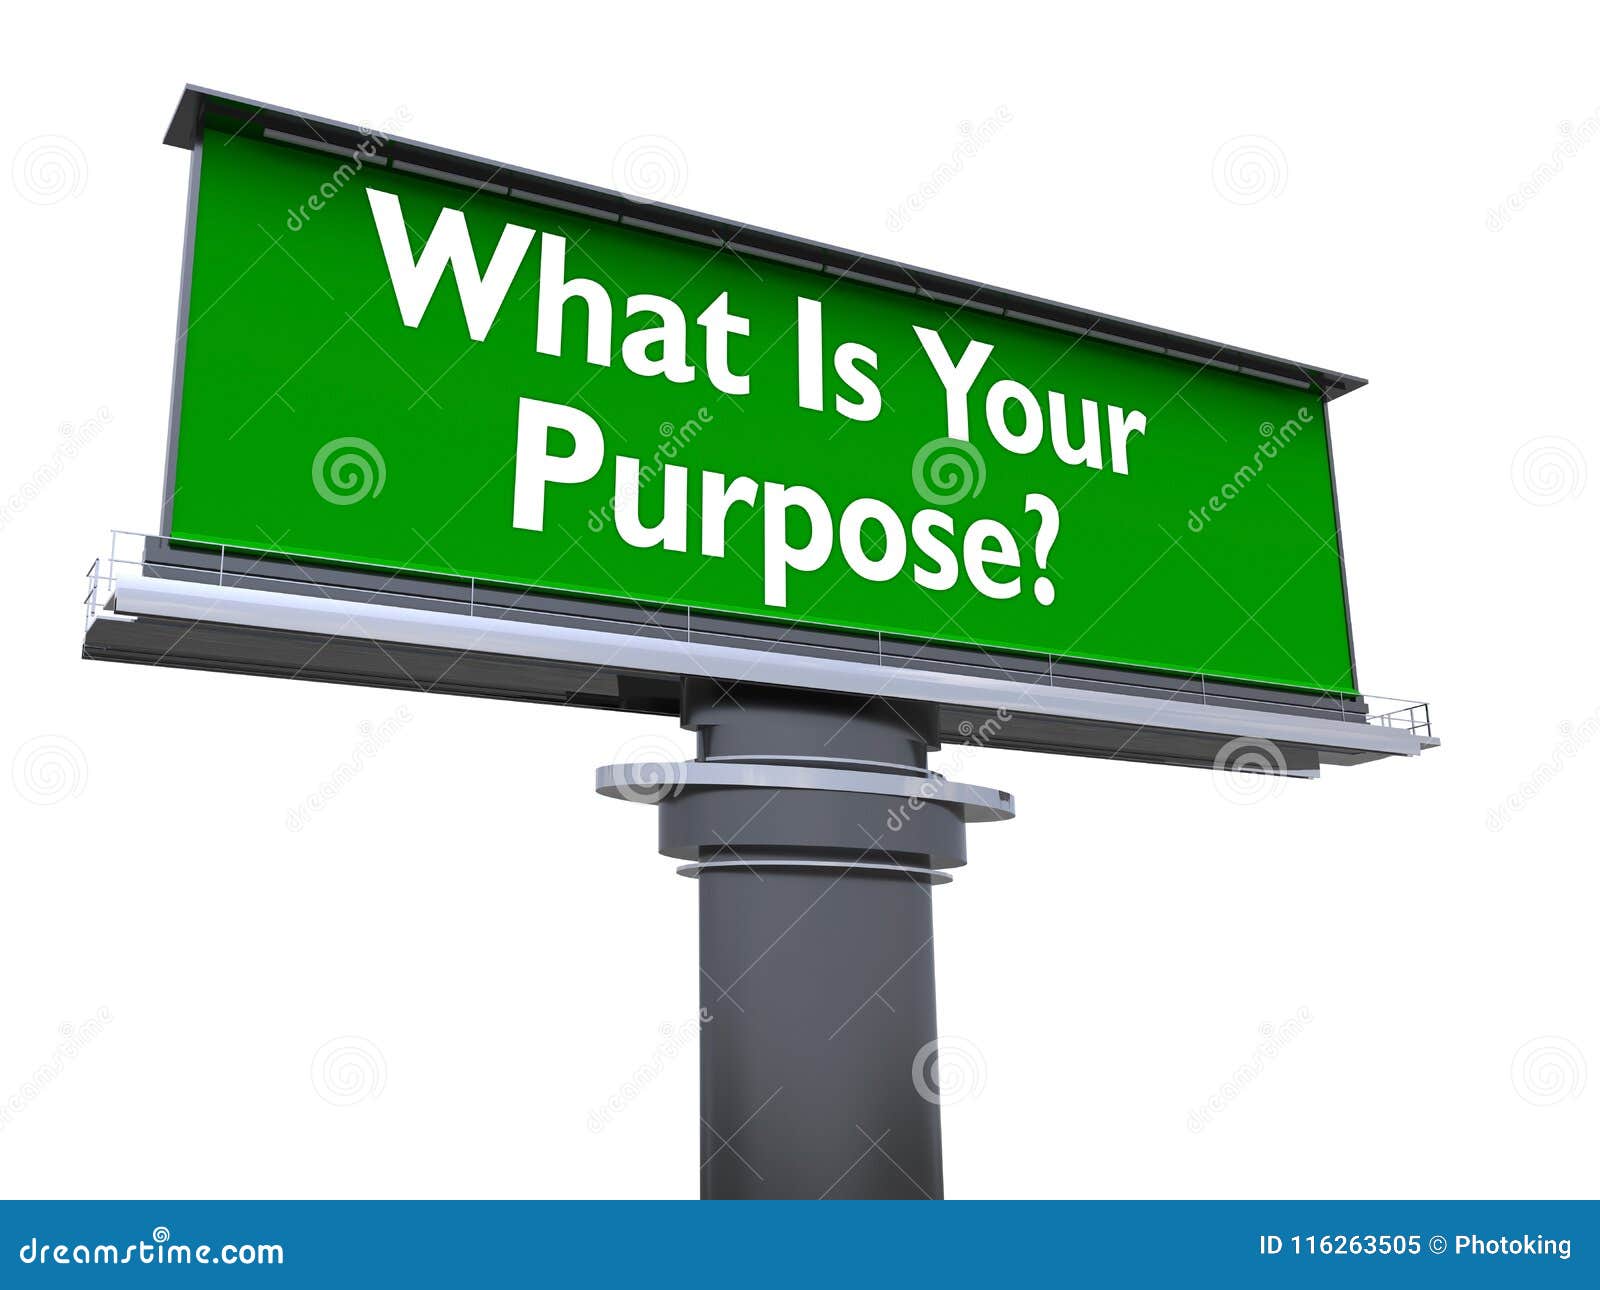 what is your purpose